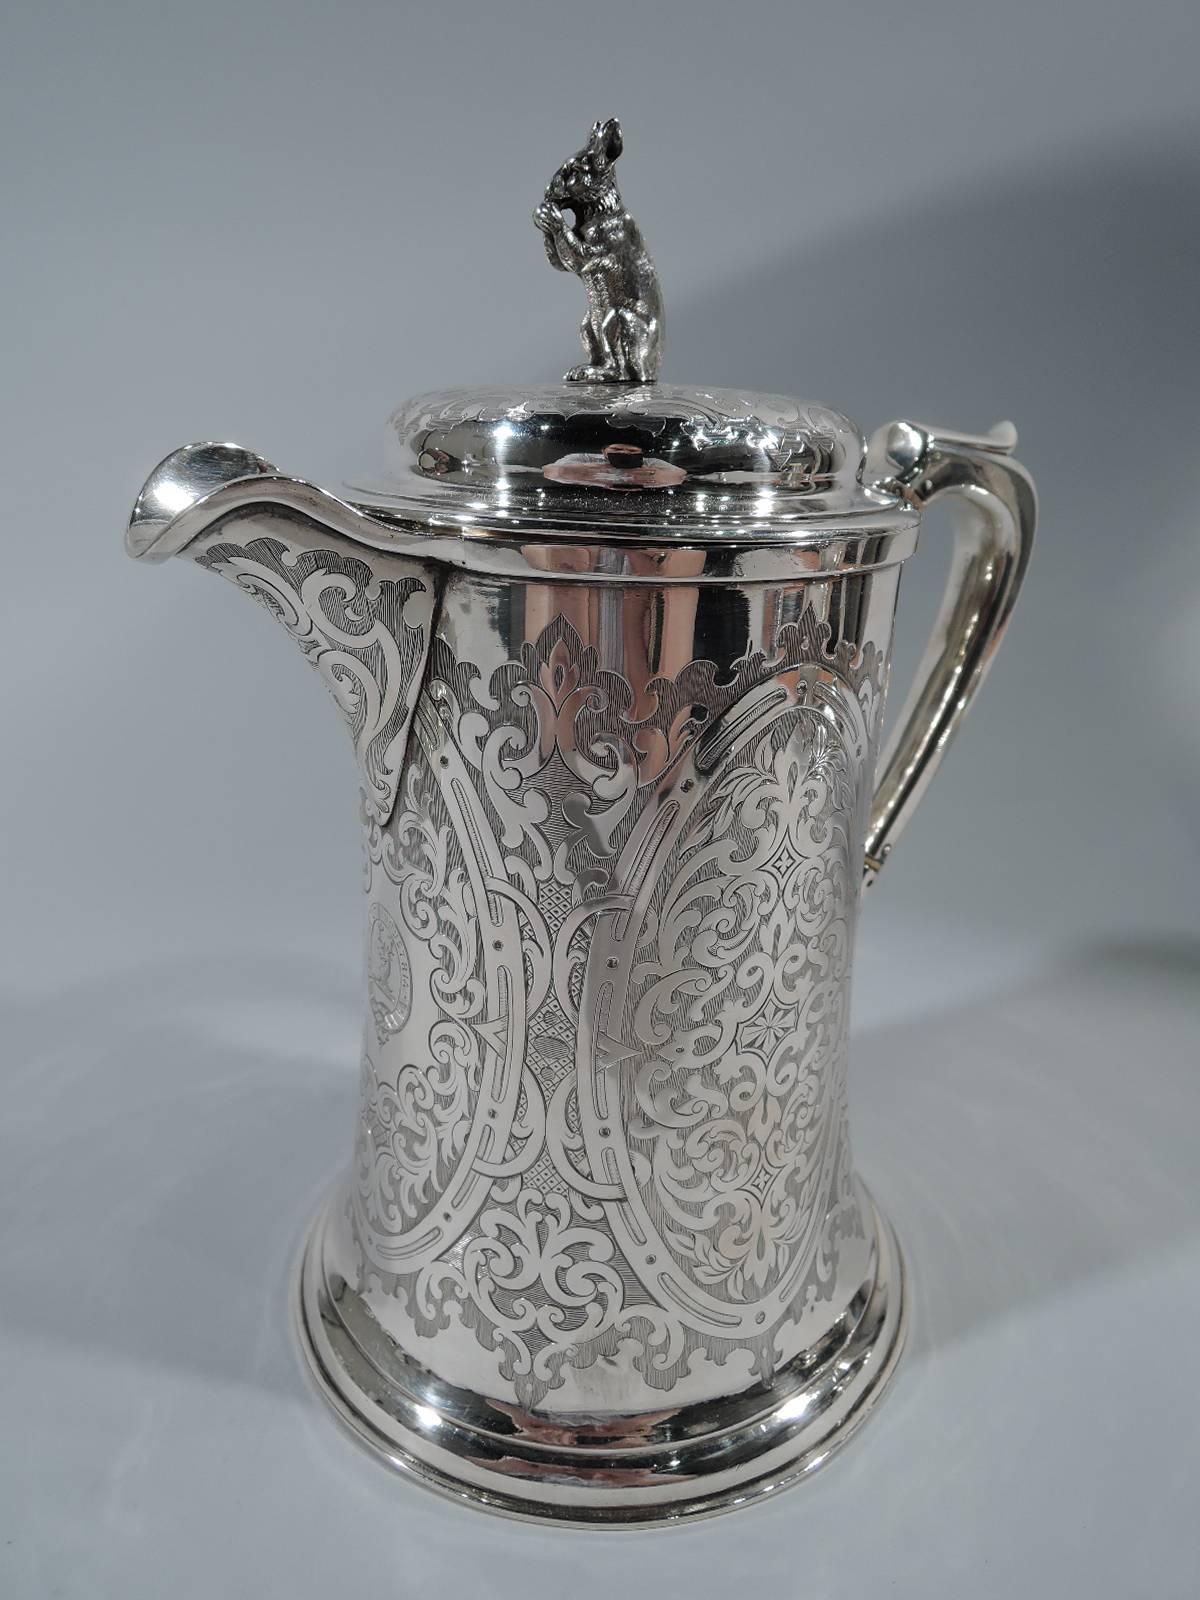 Victorian sterling silver coffeepot. Made by John Mitchell in Glasgow in 1862. Straight sides with spread base, capped scroll bracket handle, and hinged cover with squirrel finial. Scroll pattern in oval frames on shaded ground. An exciting period